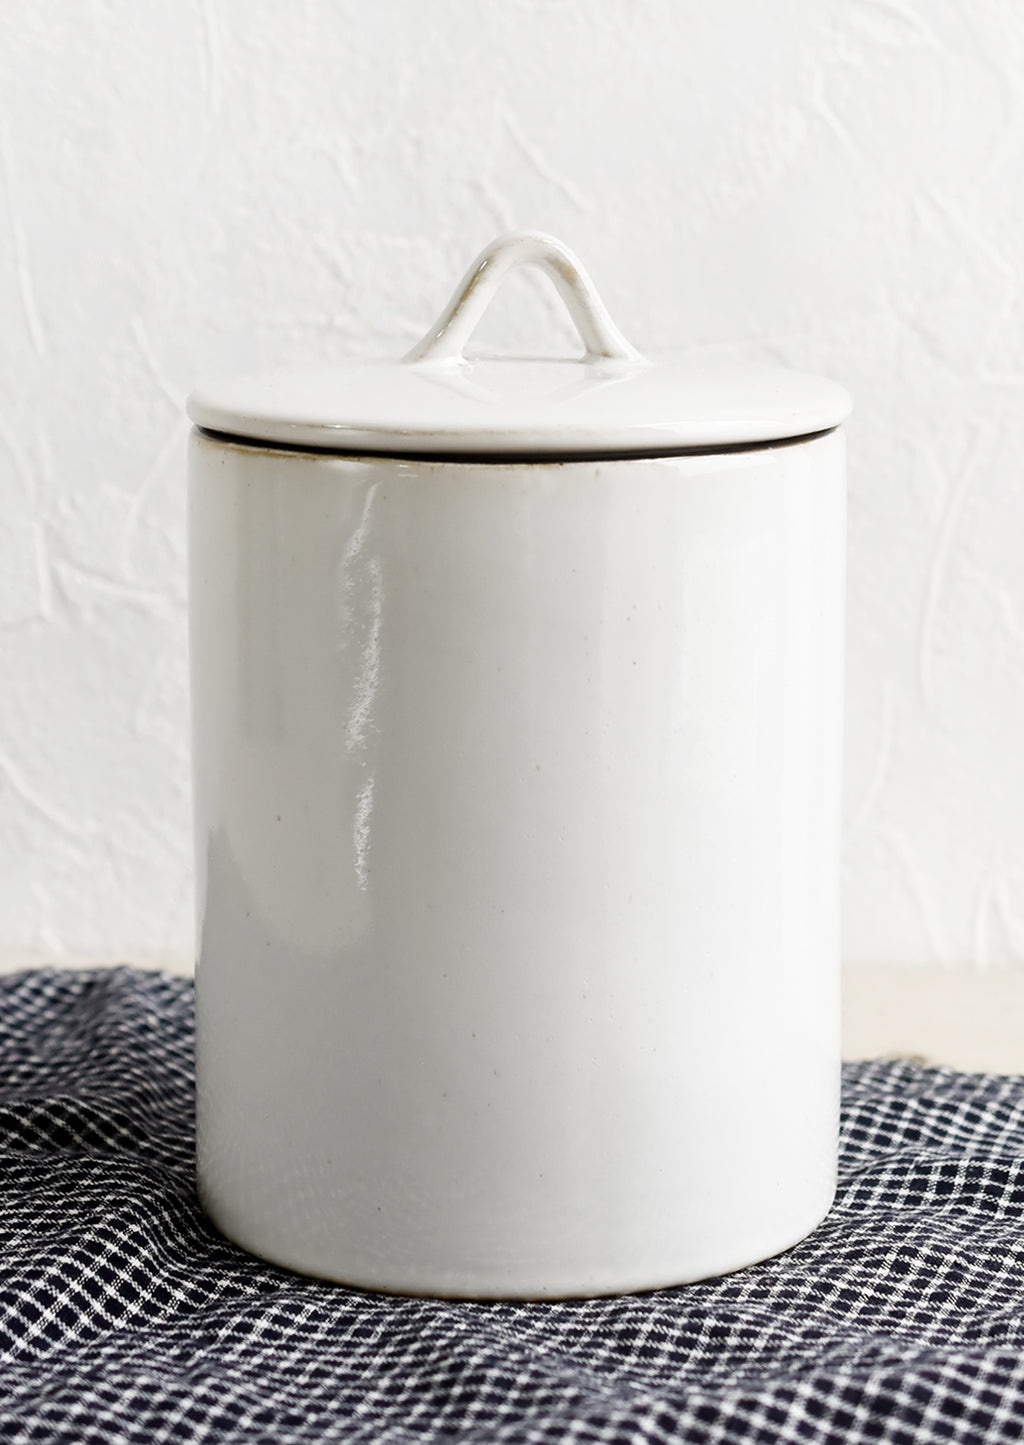 1: A tall, cylindrical ceramic storage jar in glossy white glaze with handled lid.